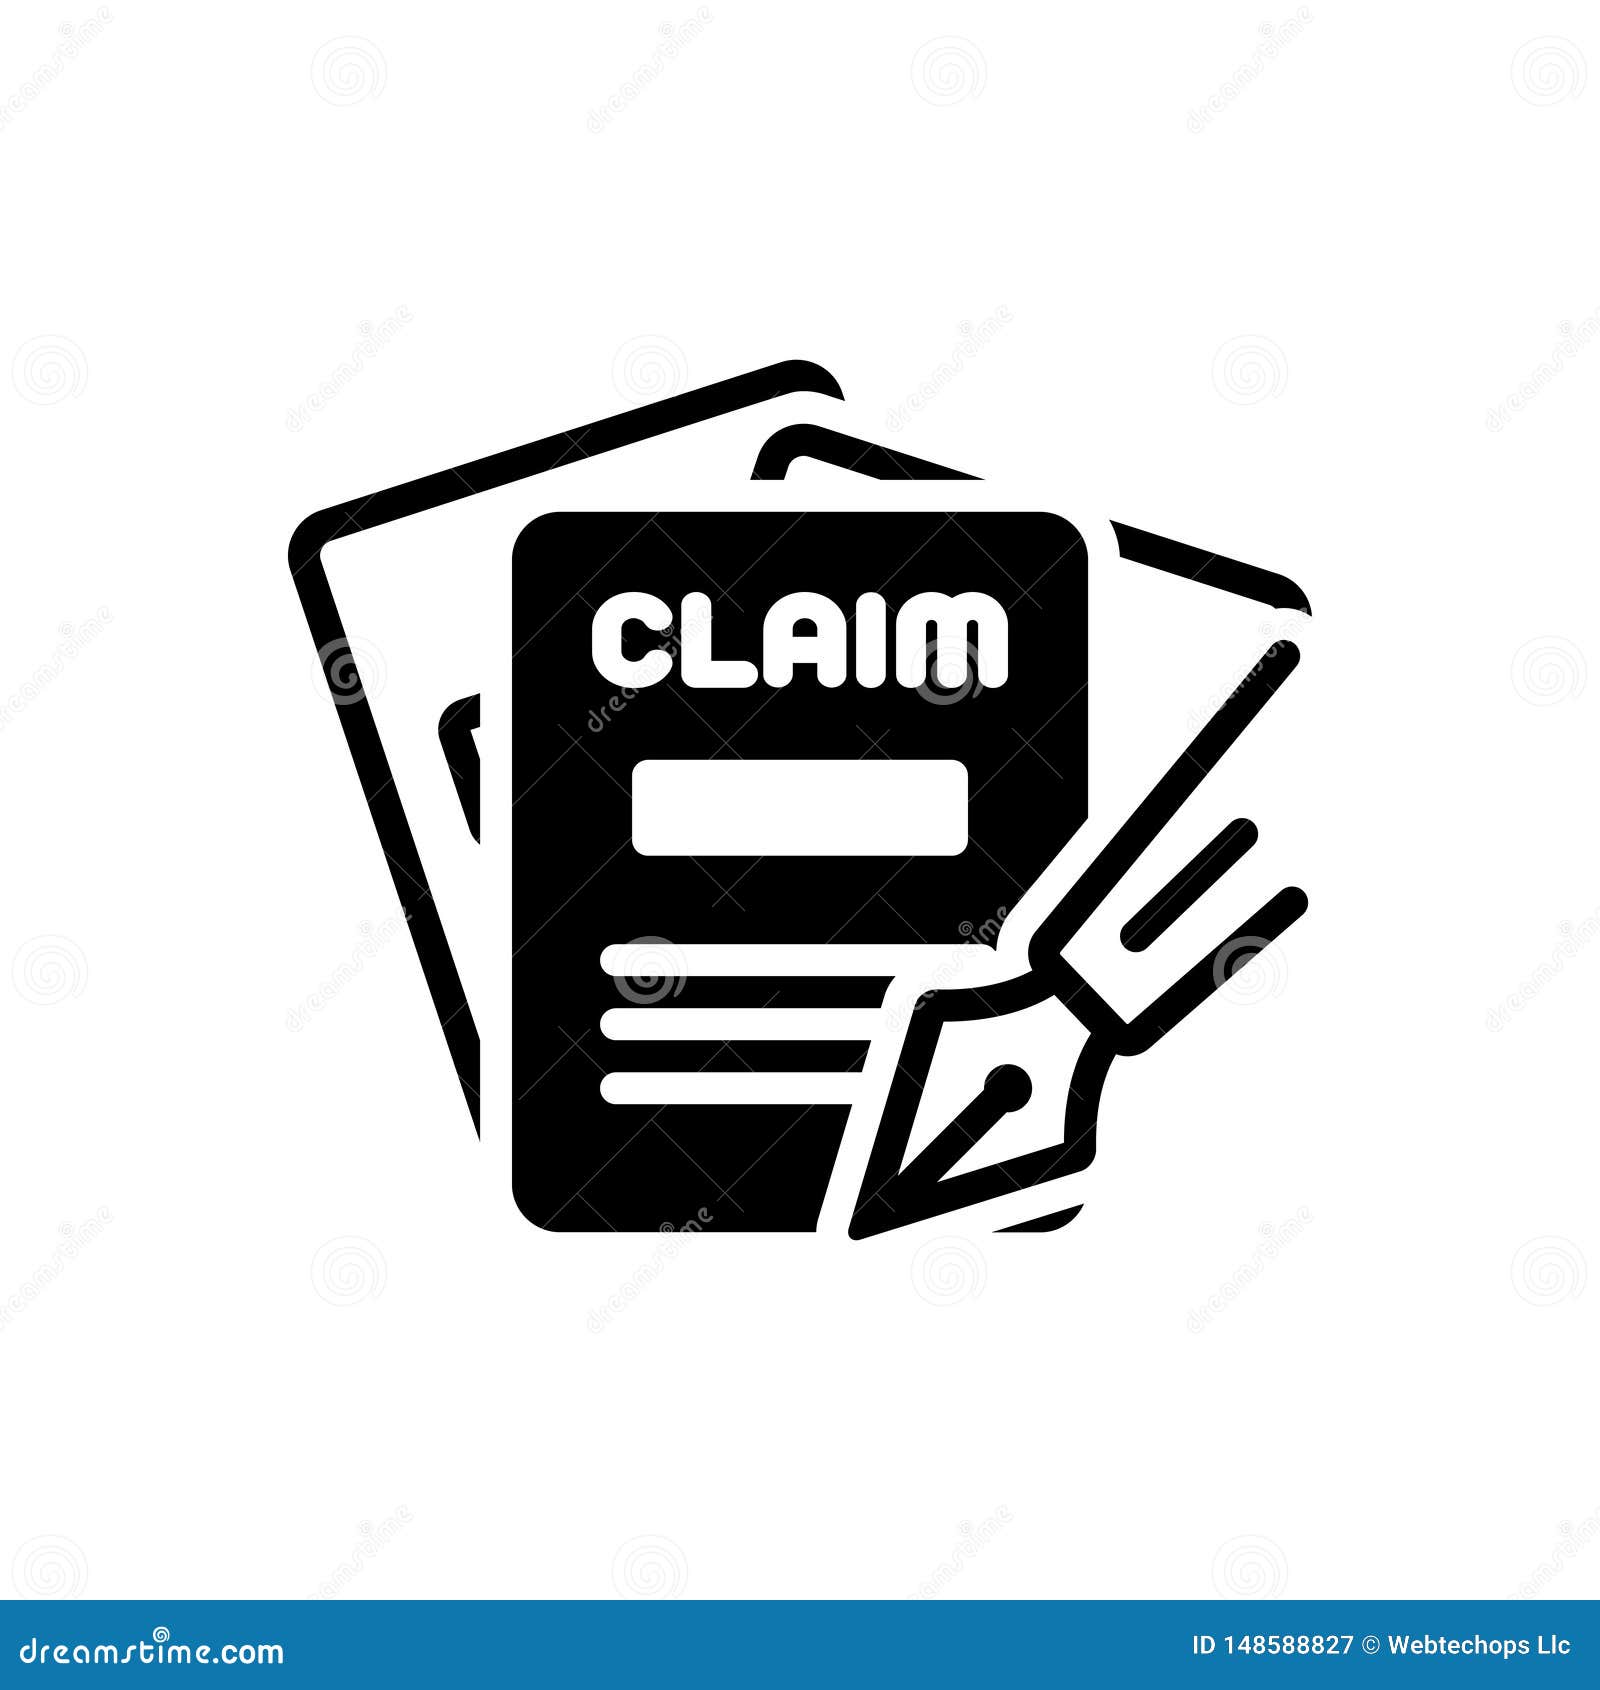 black solid icon for claims, money and insurance